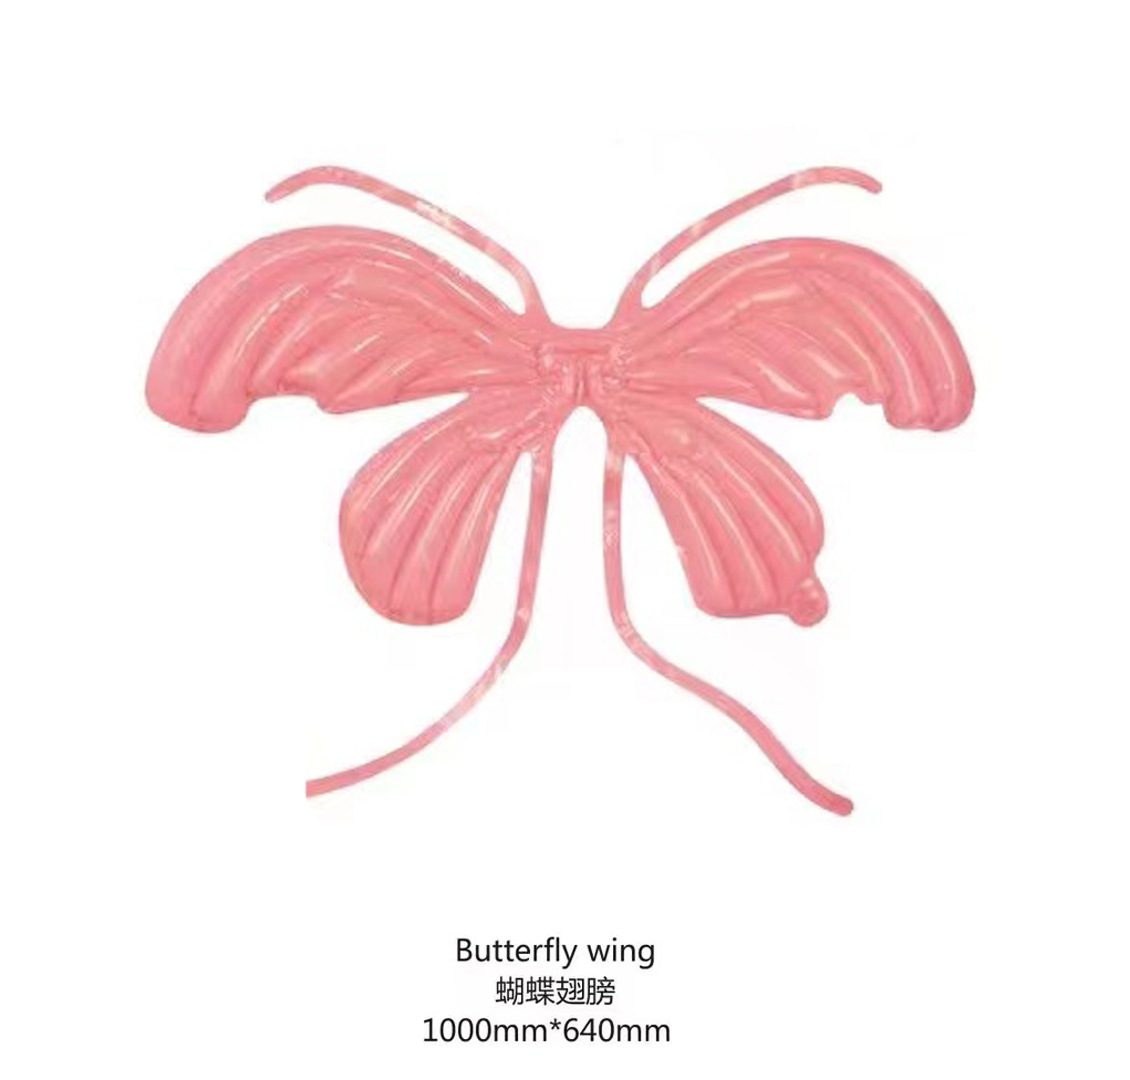 Internet Celebrity Angel Butterfly Wings Balloon Aluminum Film Strap Inflatable Macaron Color Children Outdoor Push Swing